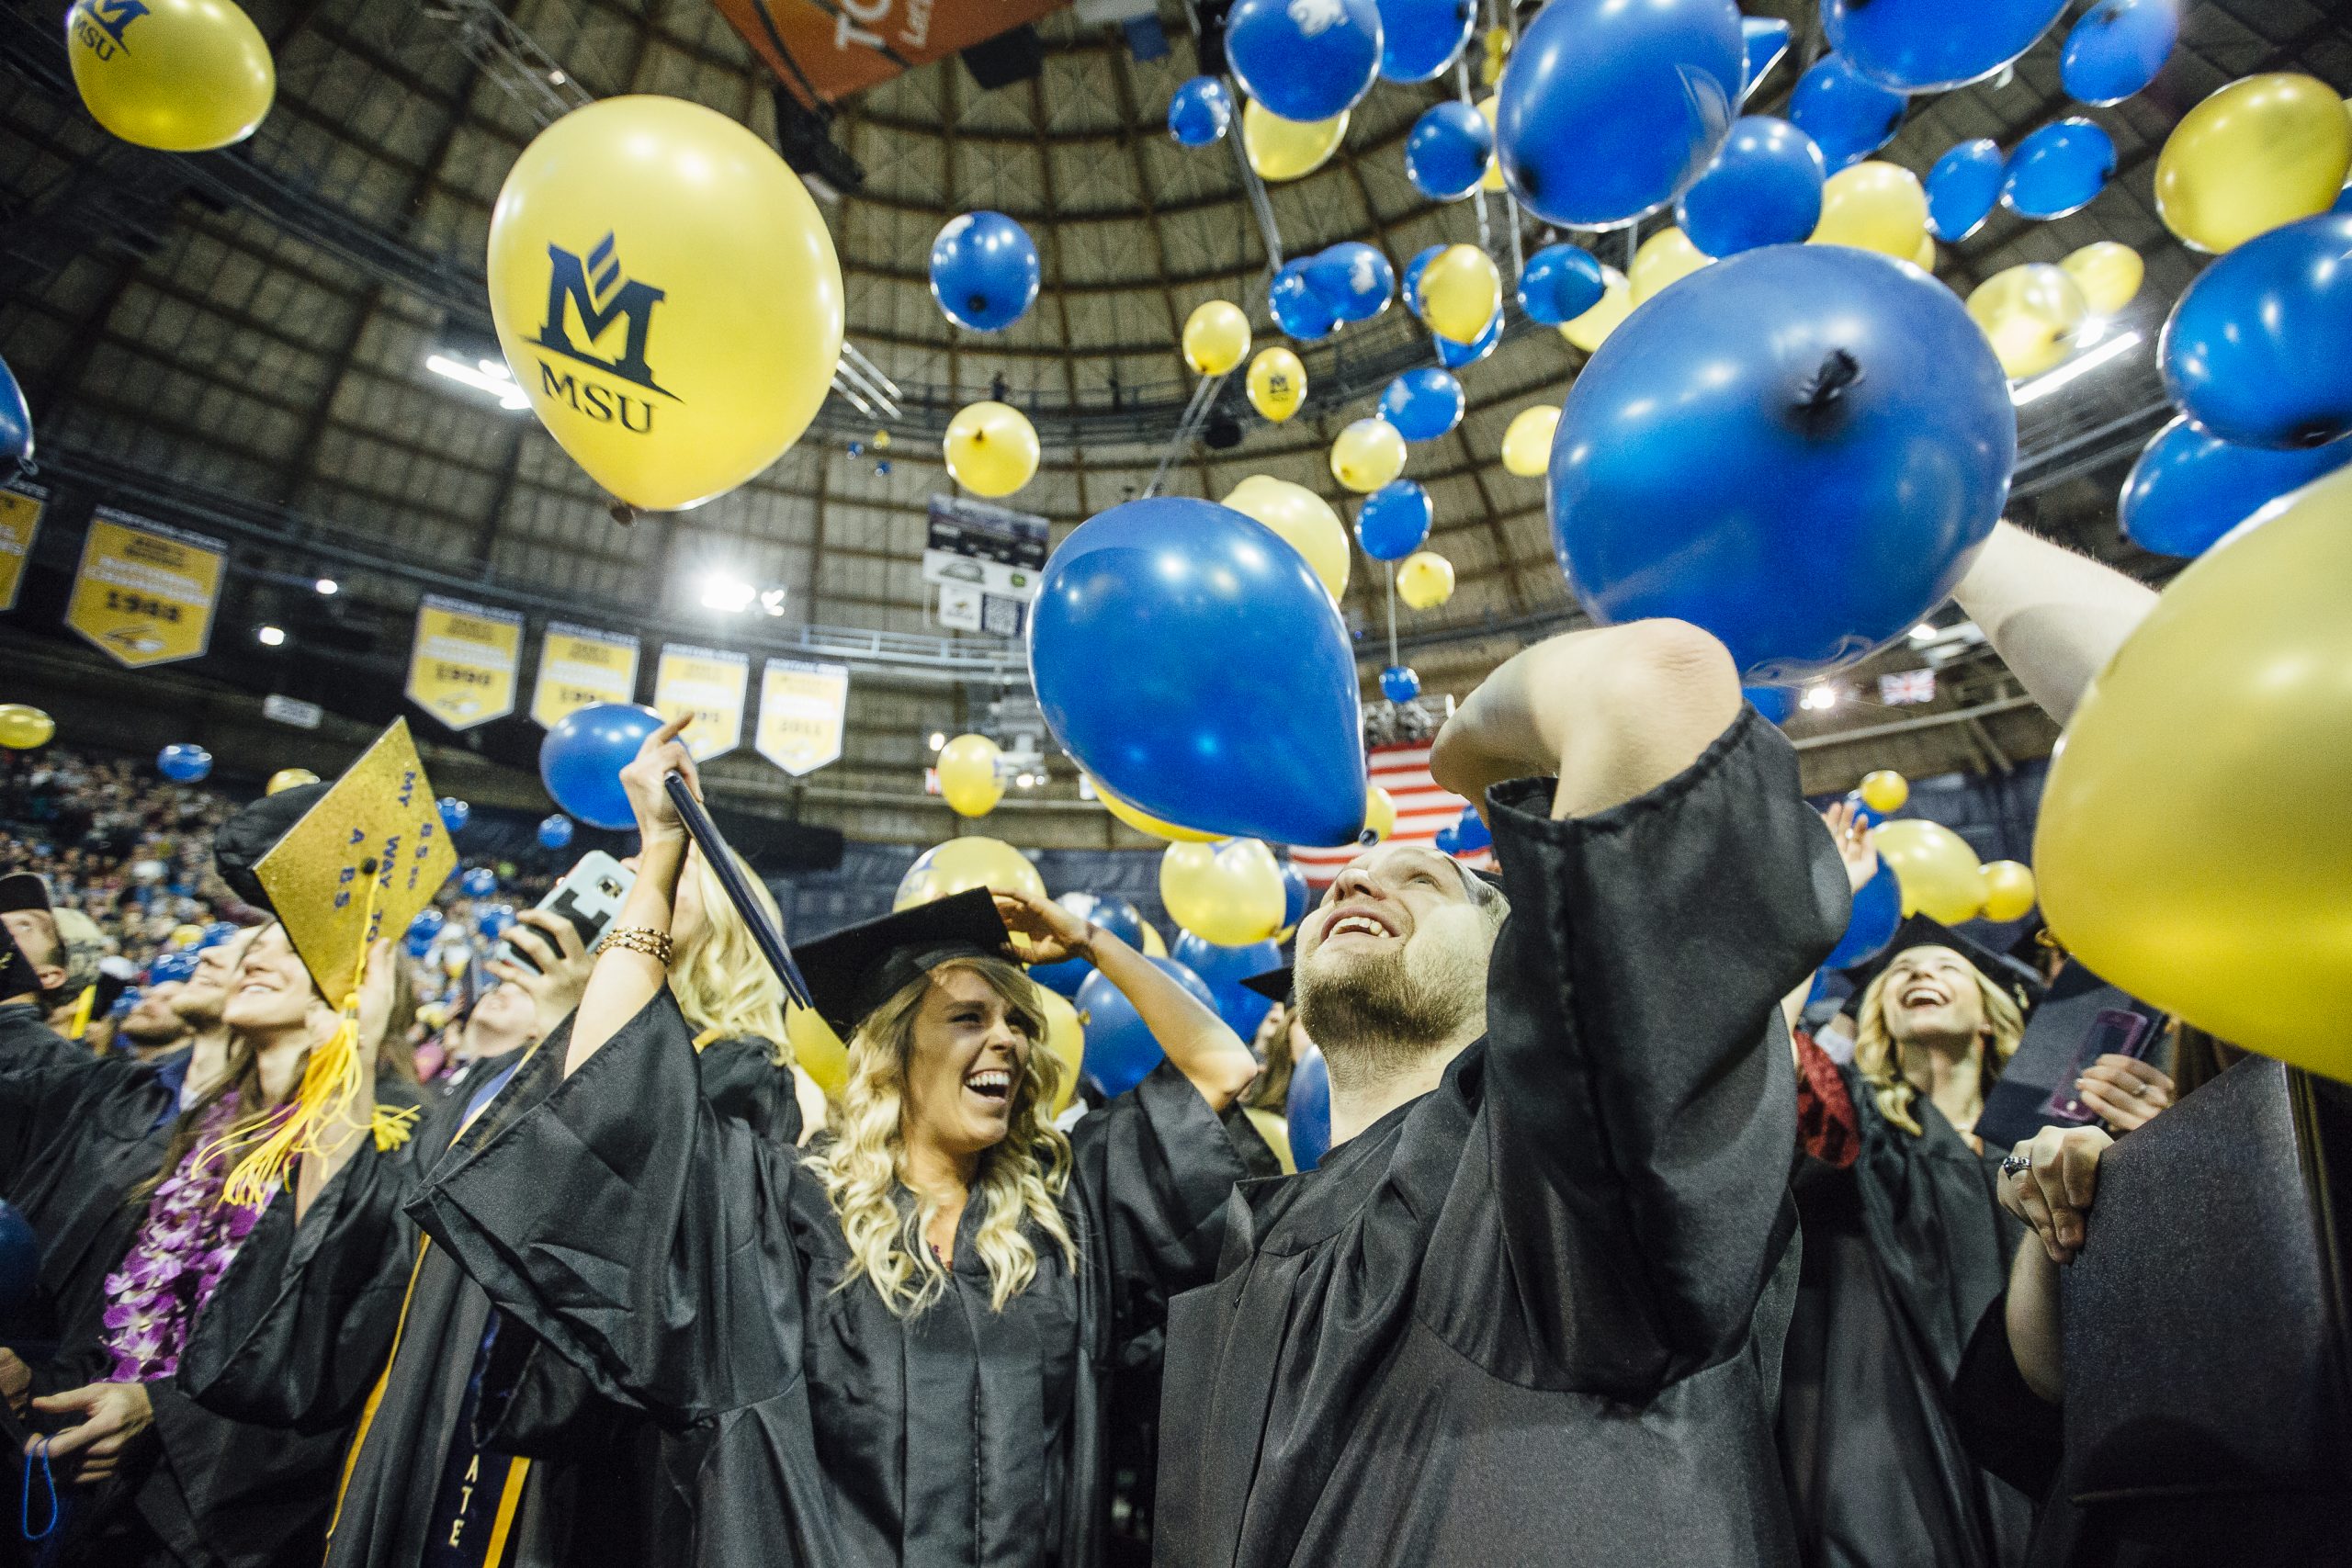 MSU Spring 2021 Commencement to take place in person May 1 The BoZone